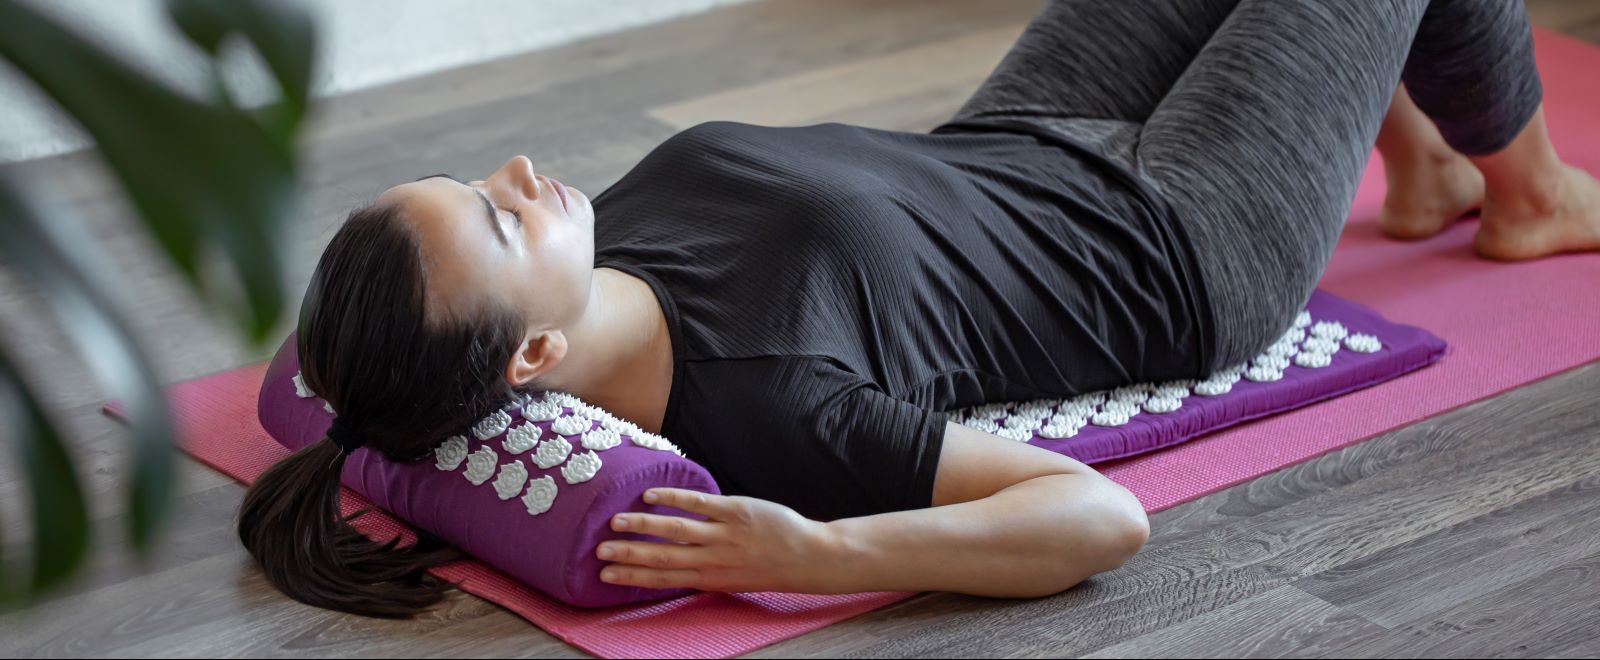 Can Acupressure Mats Really Help With Chronic Pain? - Health News Hub